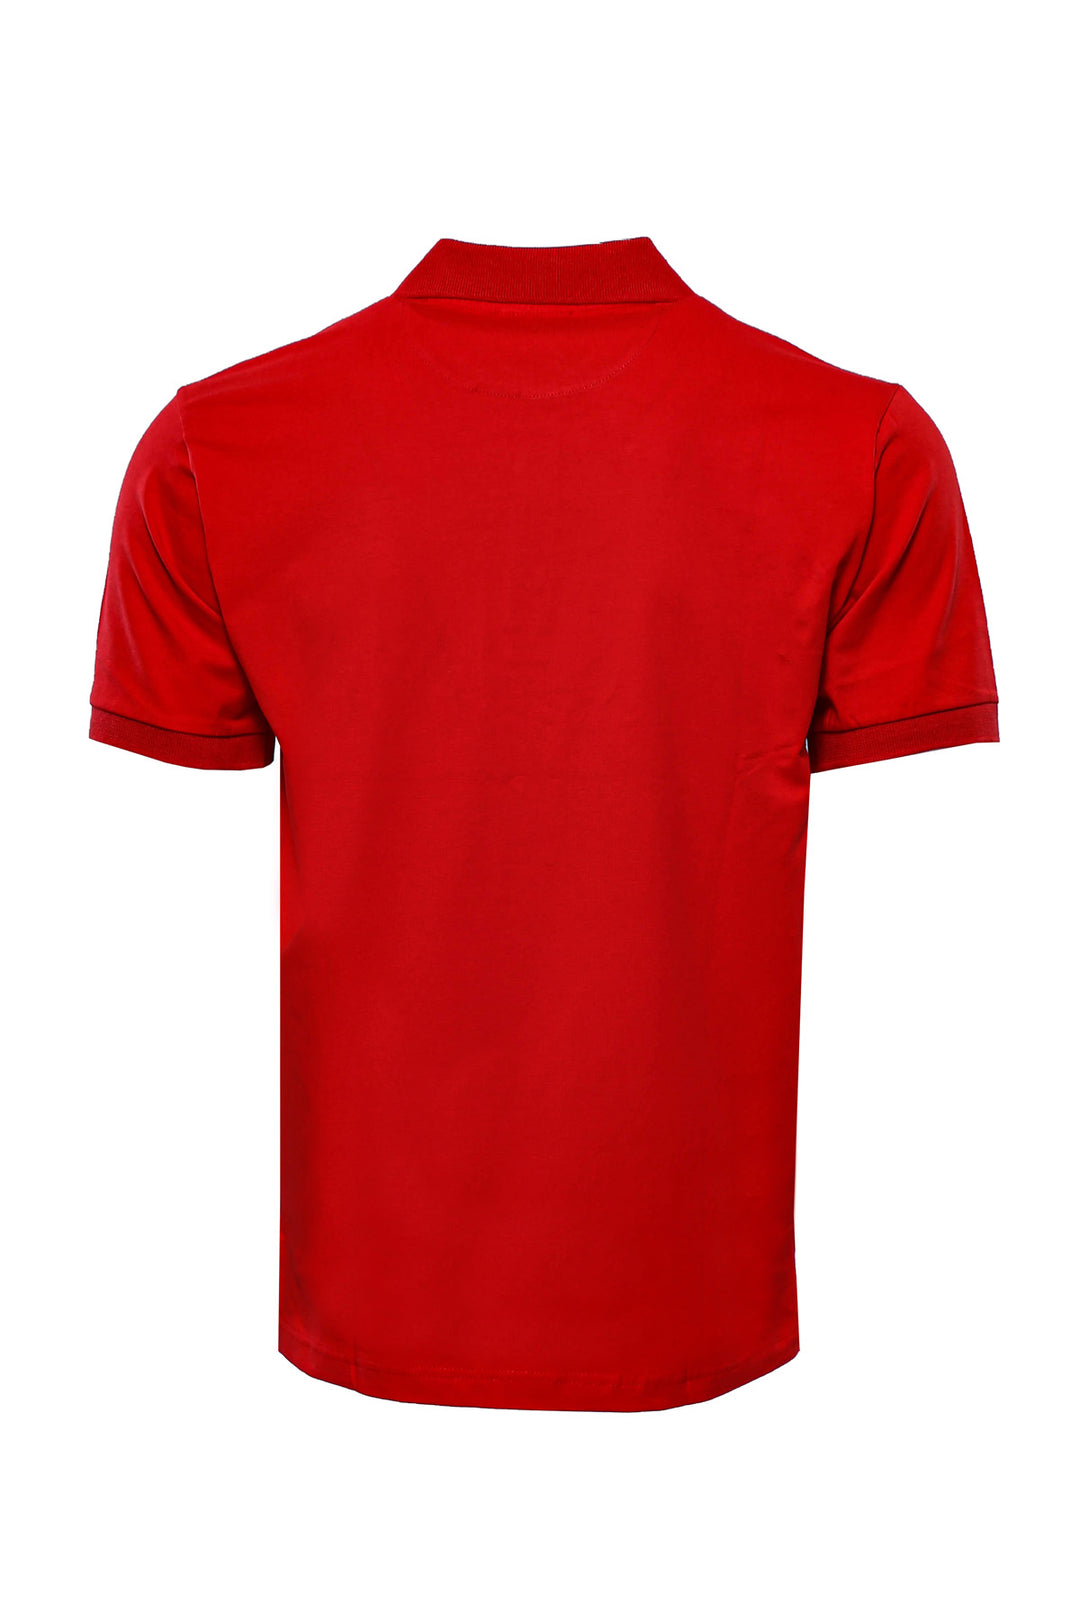 Plain Red Polo Collar T-Shirt - Wessi